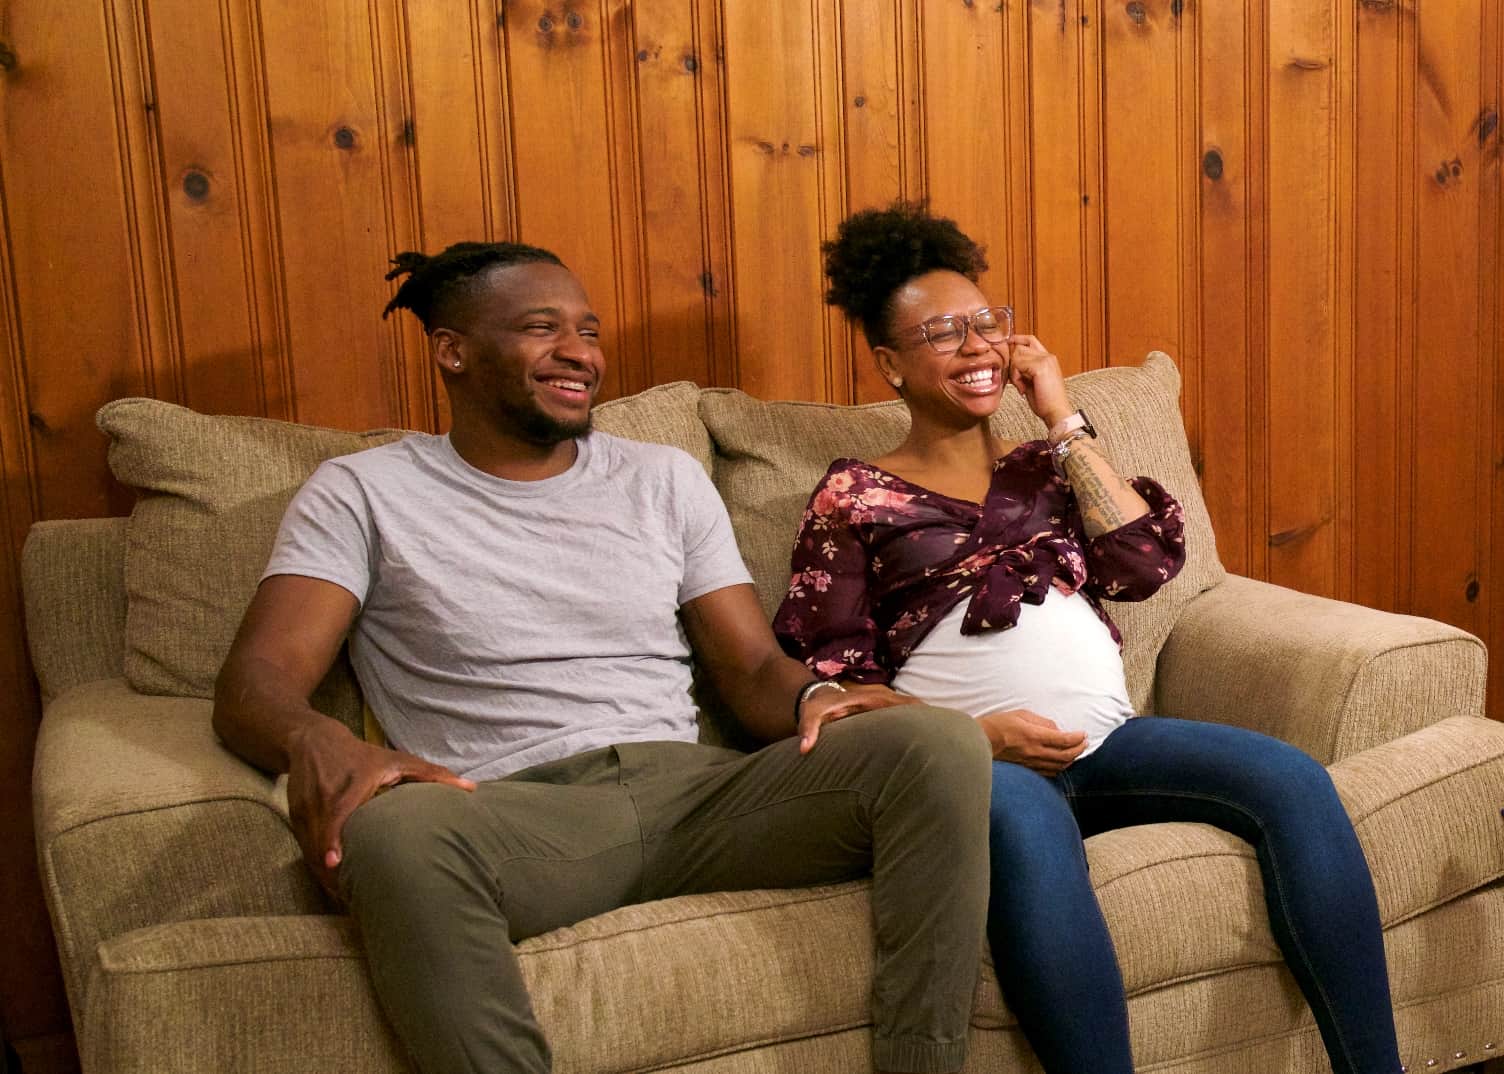 Shawniece and Jephte Married at First Sight Happily Ever After Interview